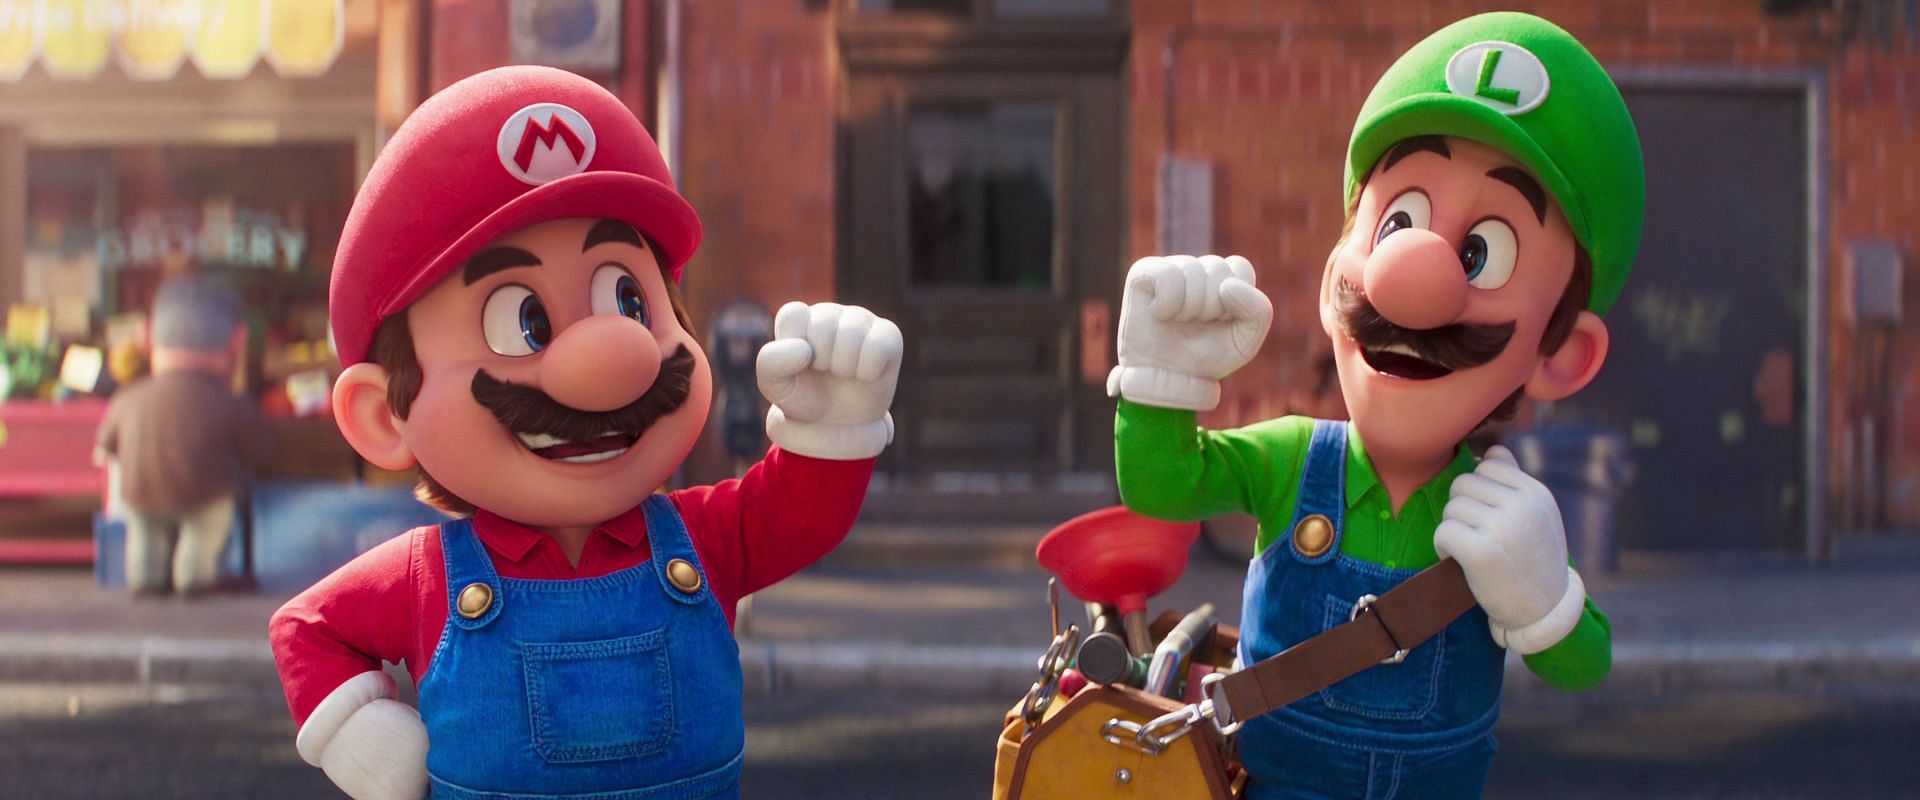 Super Mario Bros. Movie is coming to Peacock, bringing the beloved characters and iconic world of Mario to the small screen (Image via Universal Pictures)